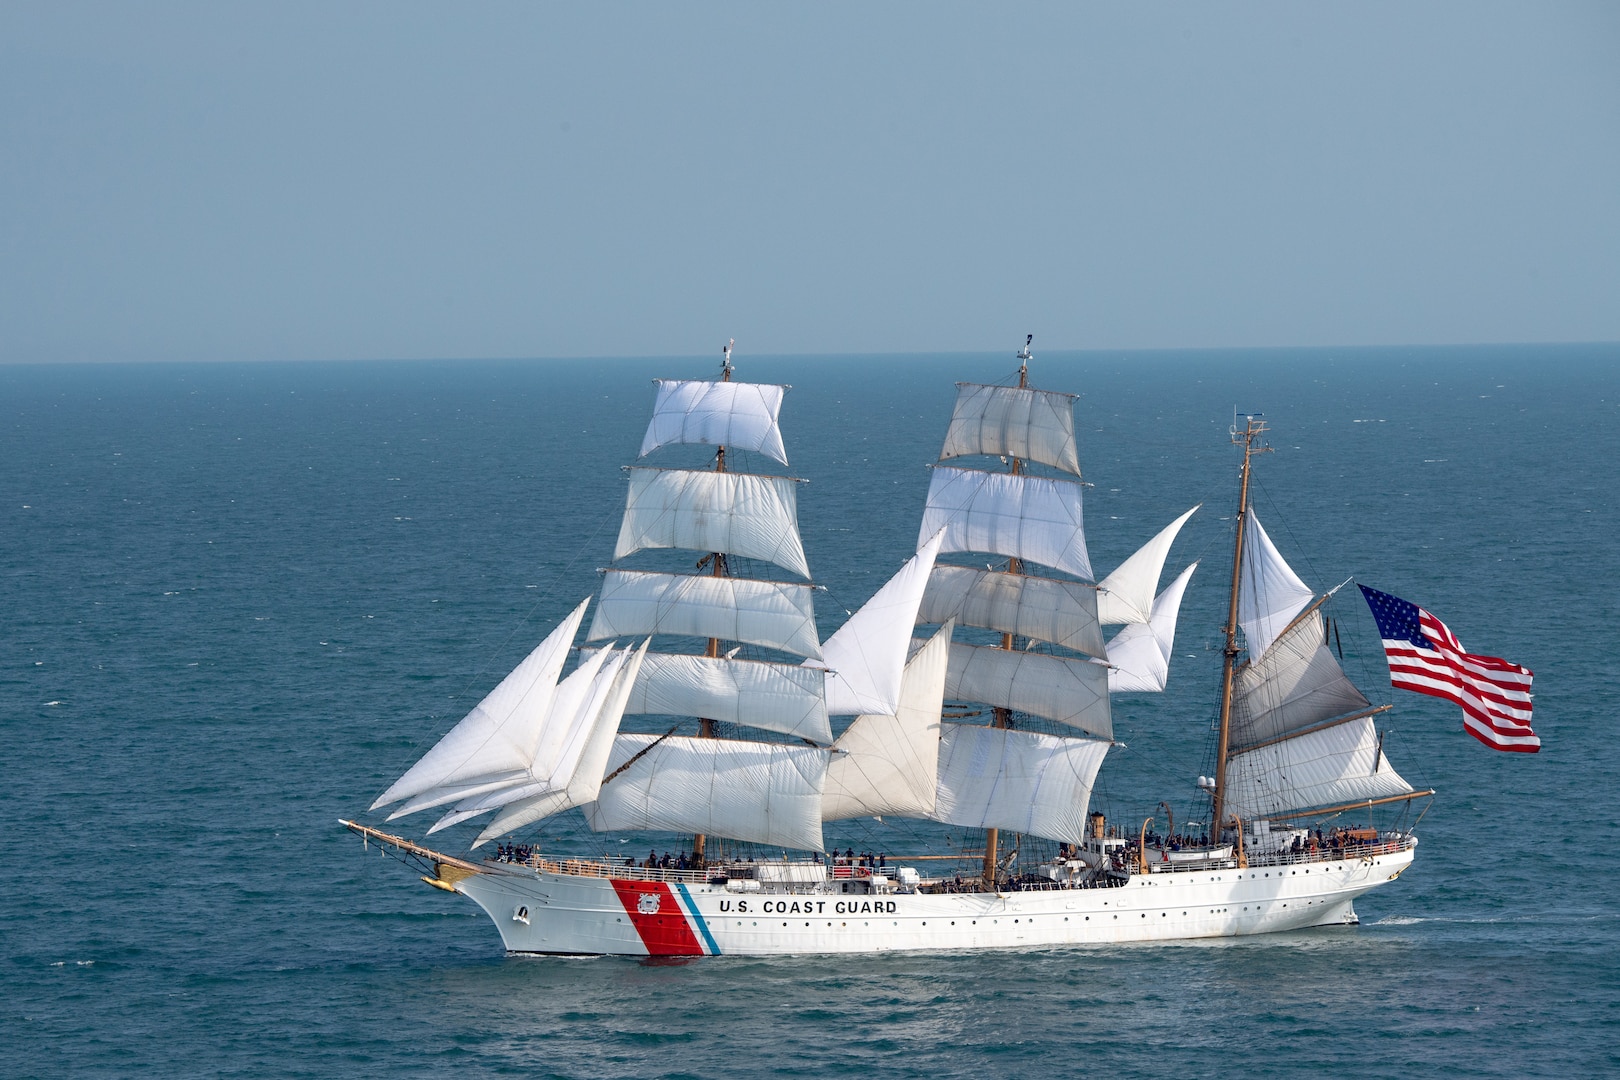 US Coast Guard Cutter Eagle to depart on annual summer cruise 